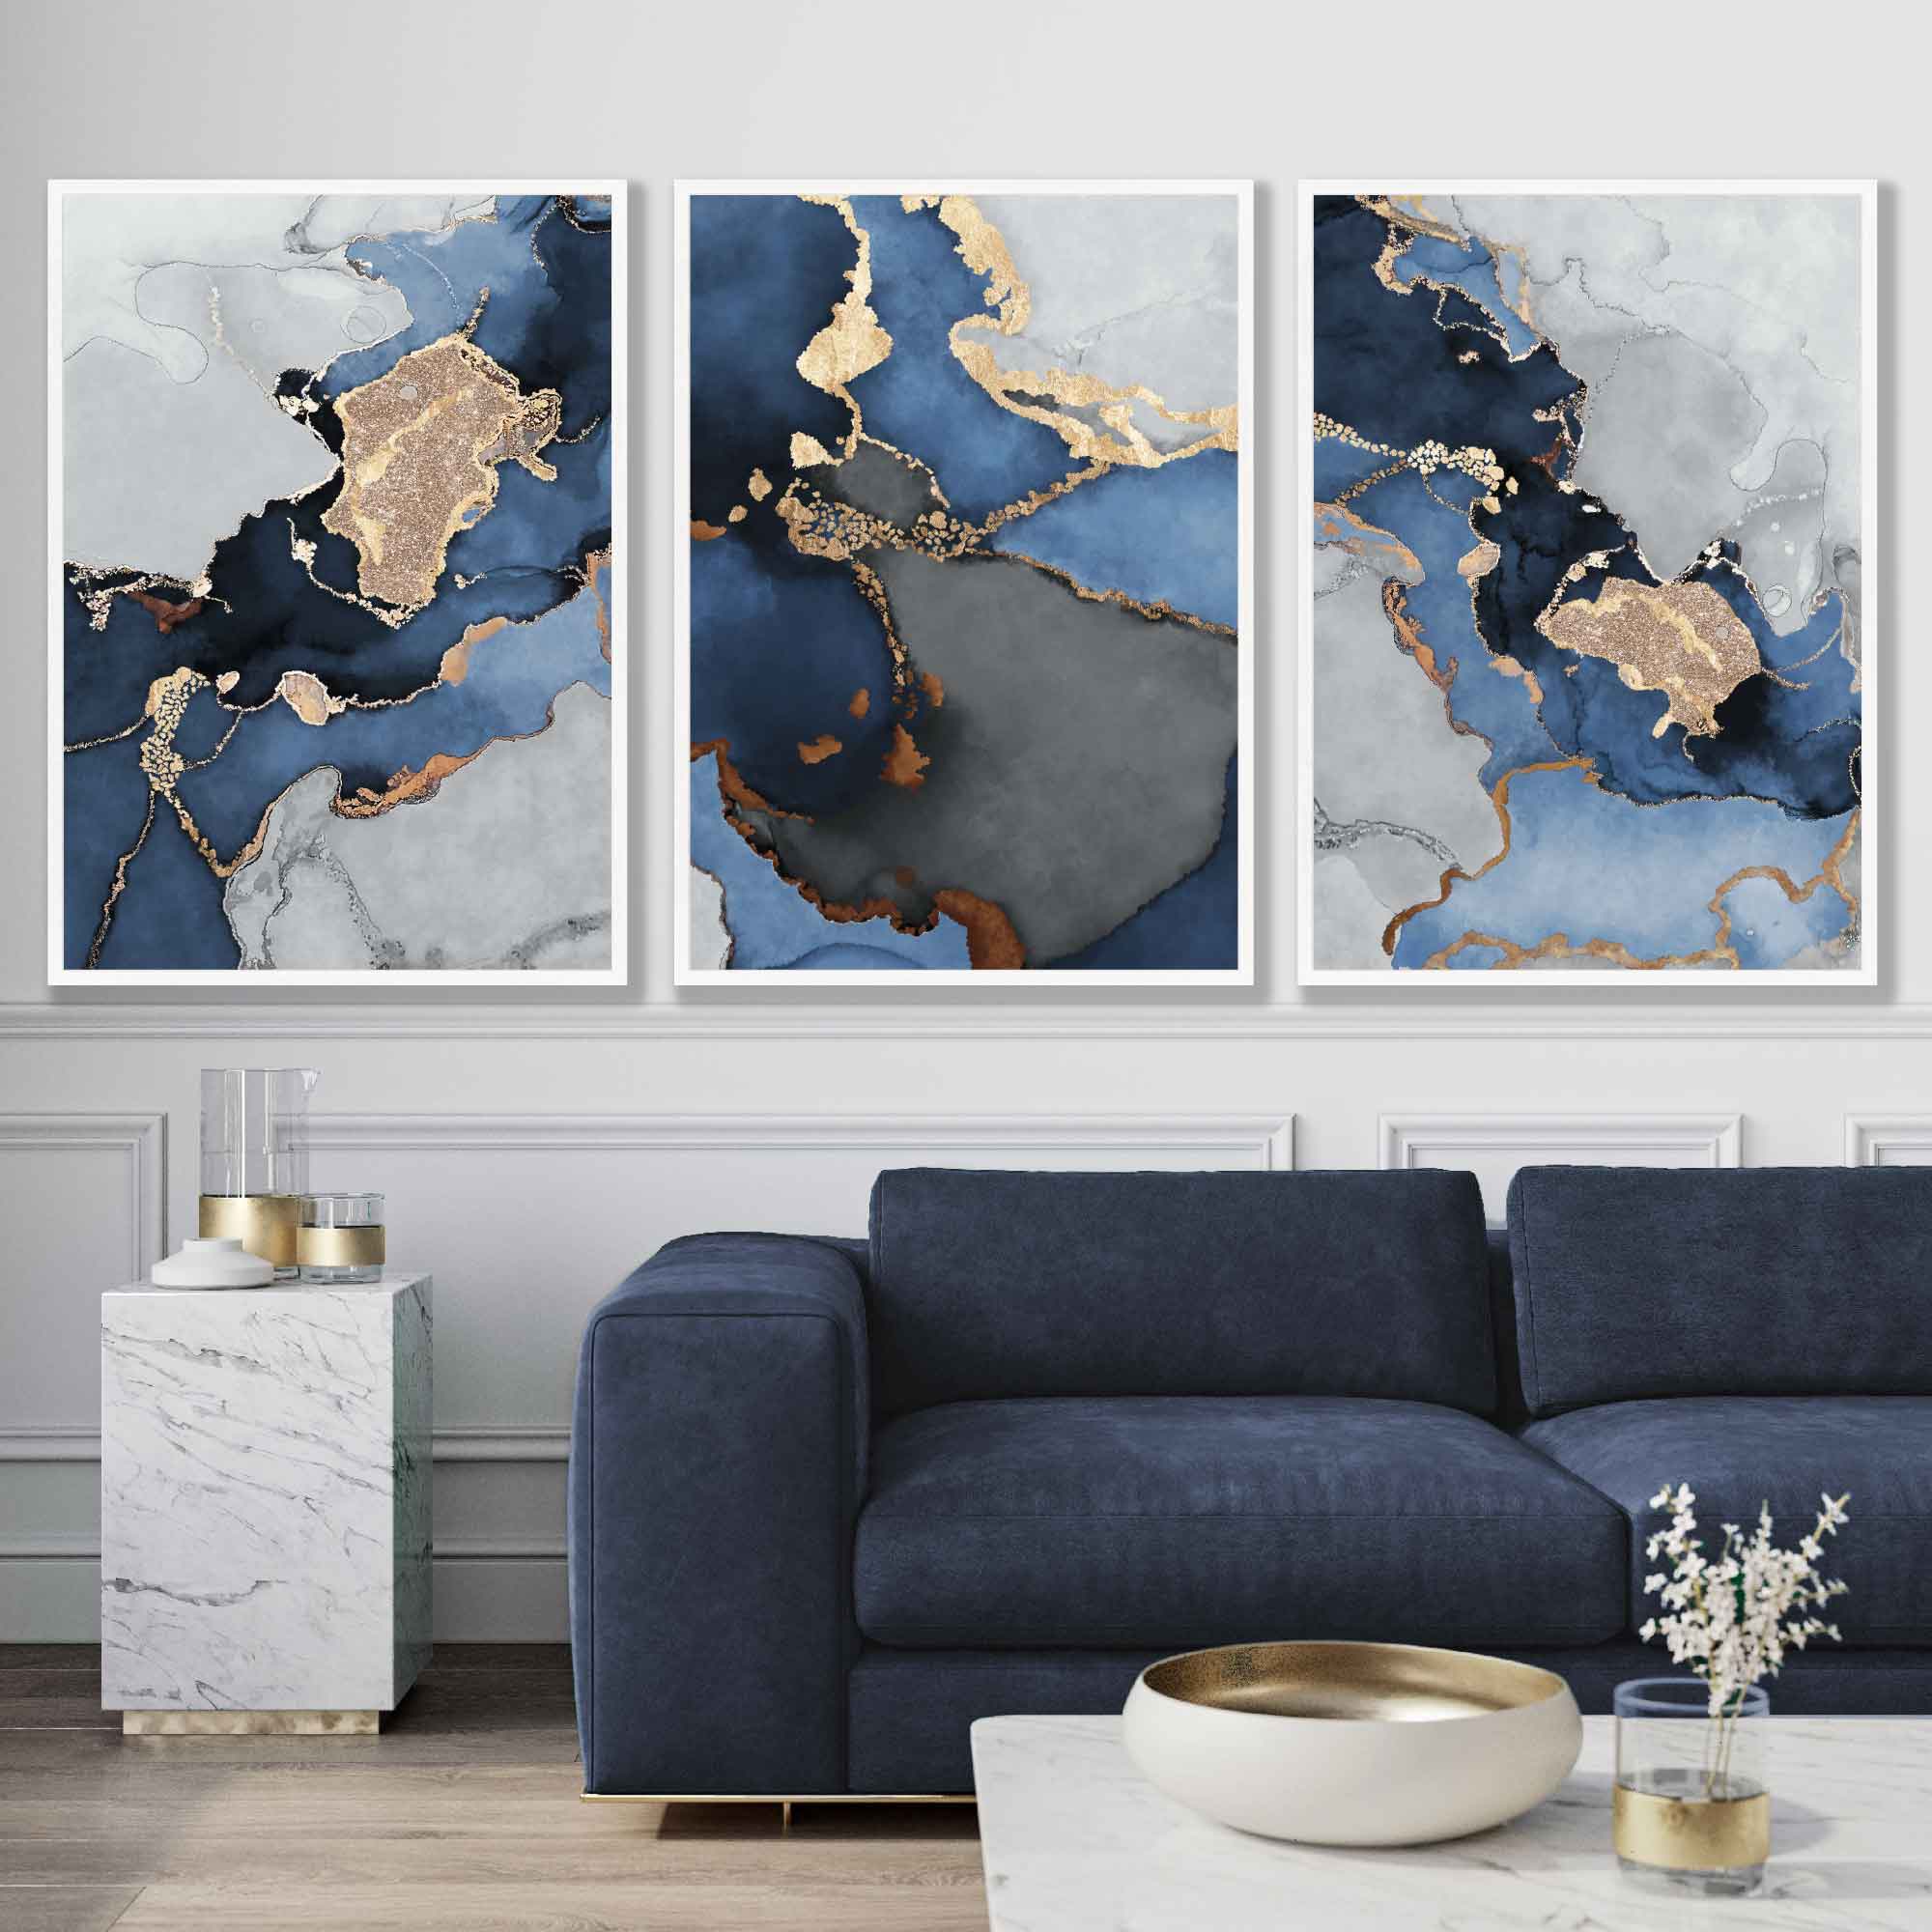 Framed Set of 3 Navy and Silver Abstract Art Prints | Artze Wall Art UK